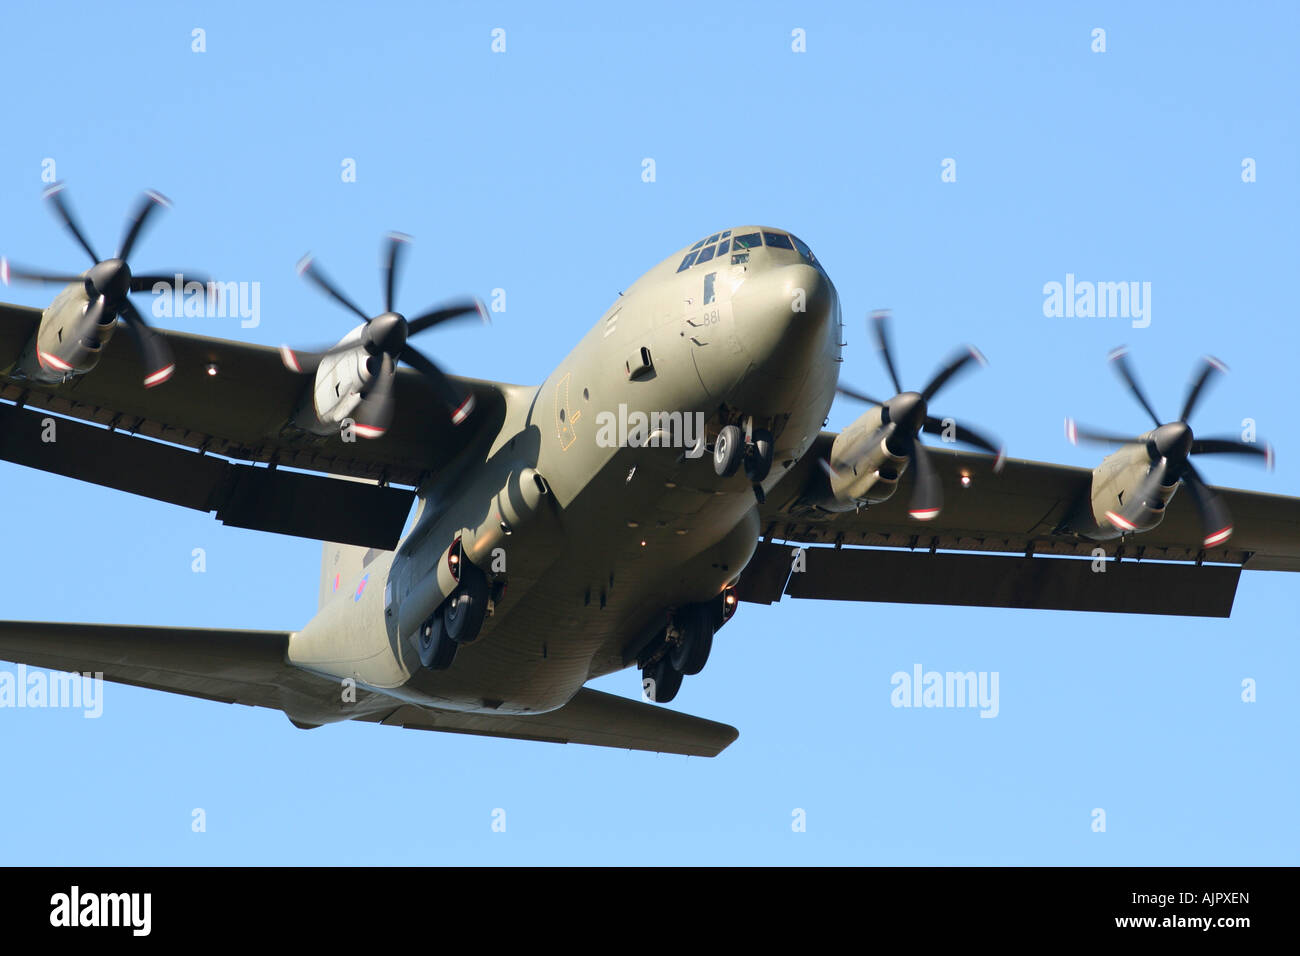 RAF Hercules on approach to land at Brize Norton airfield UK Stock Photo